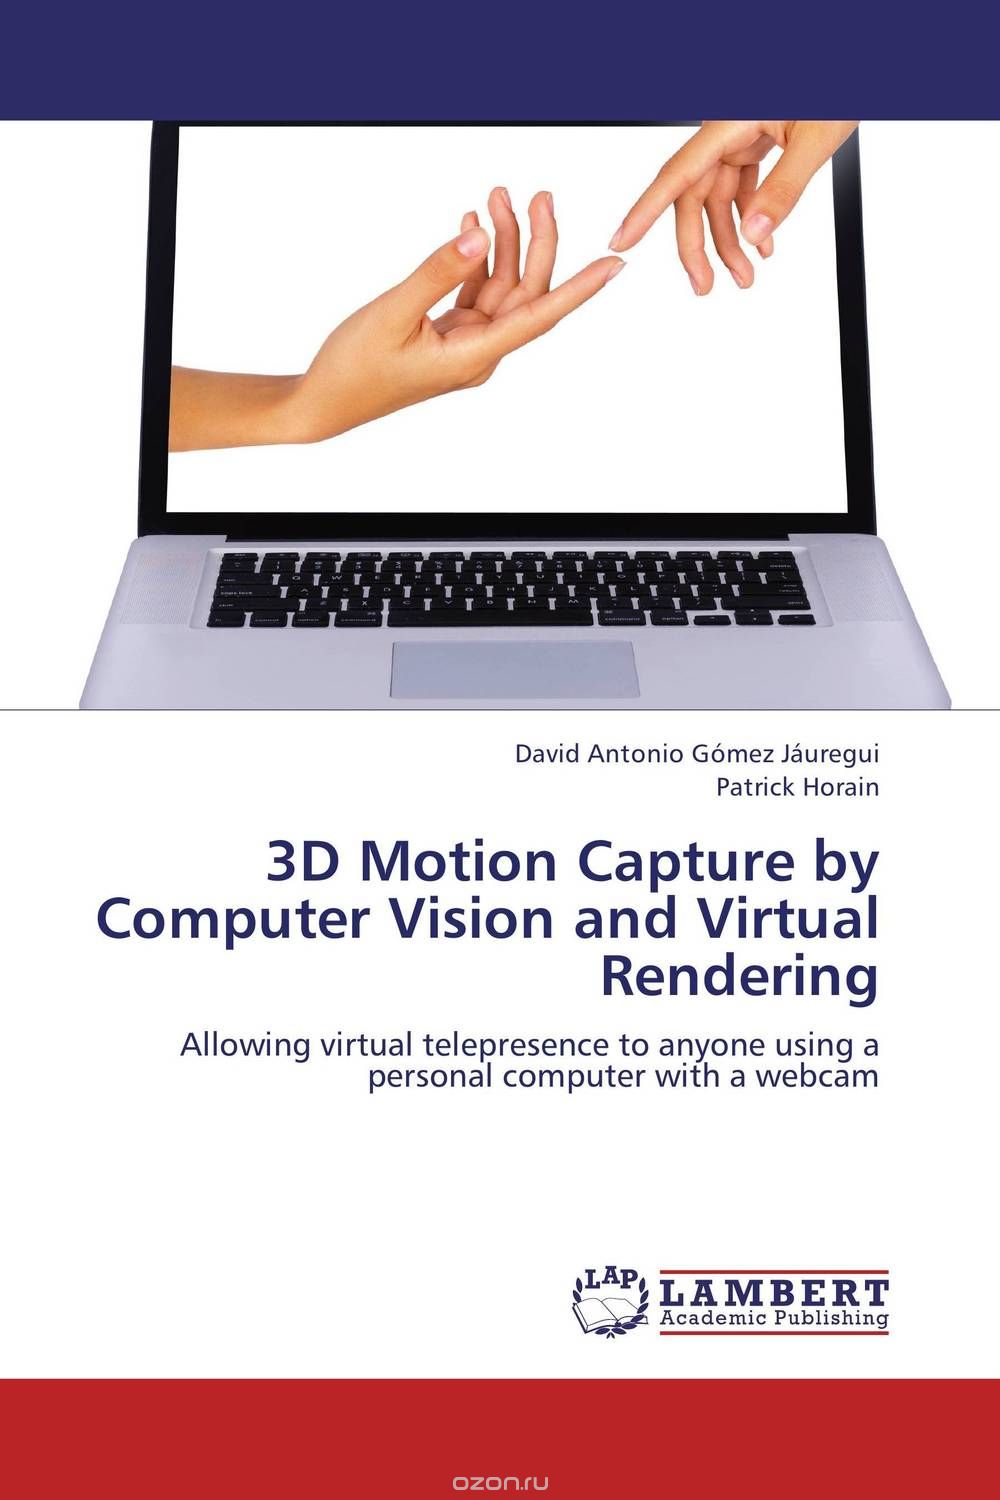 Скачать книгу "3D Motion Capture by Computer Vision and Virtual Rendering"